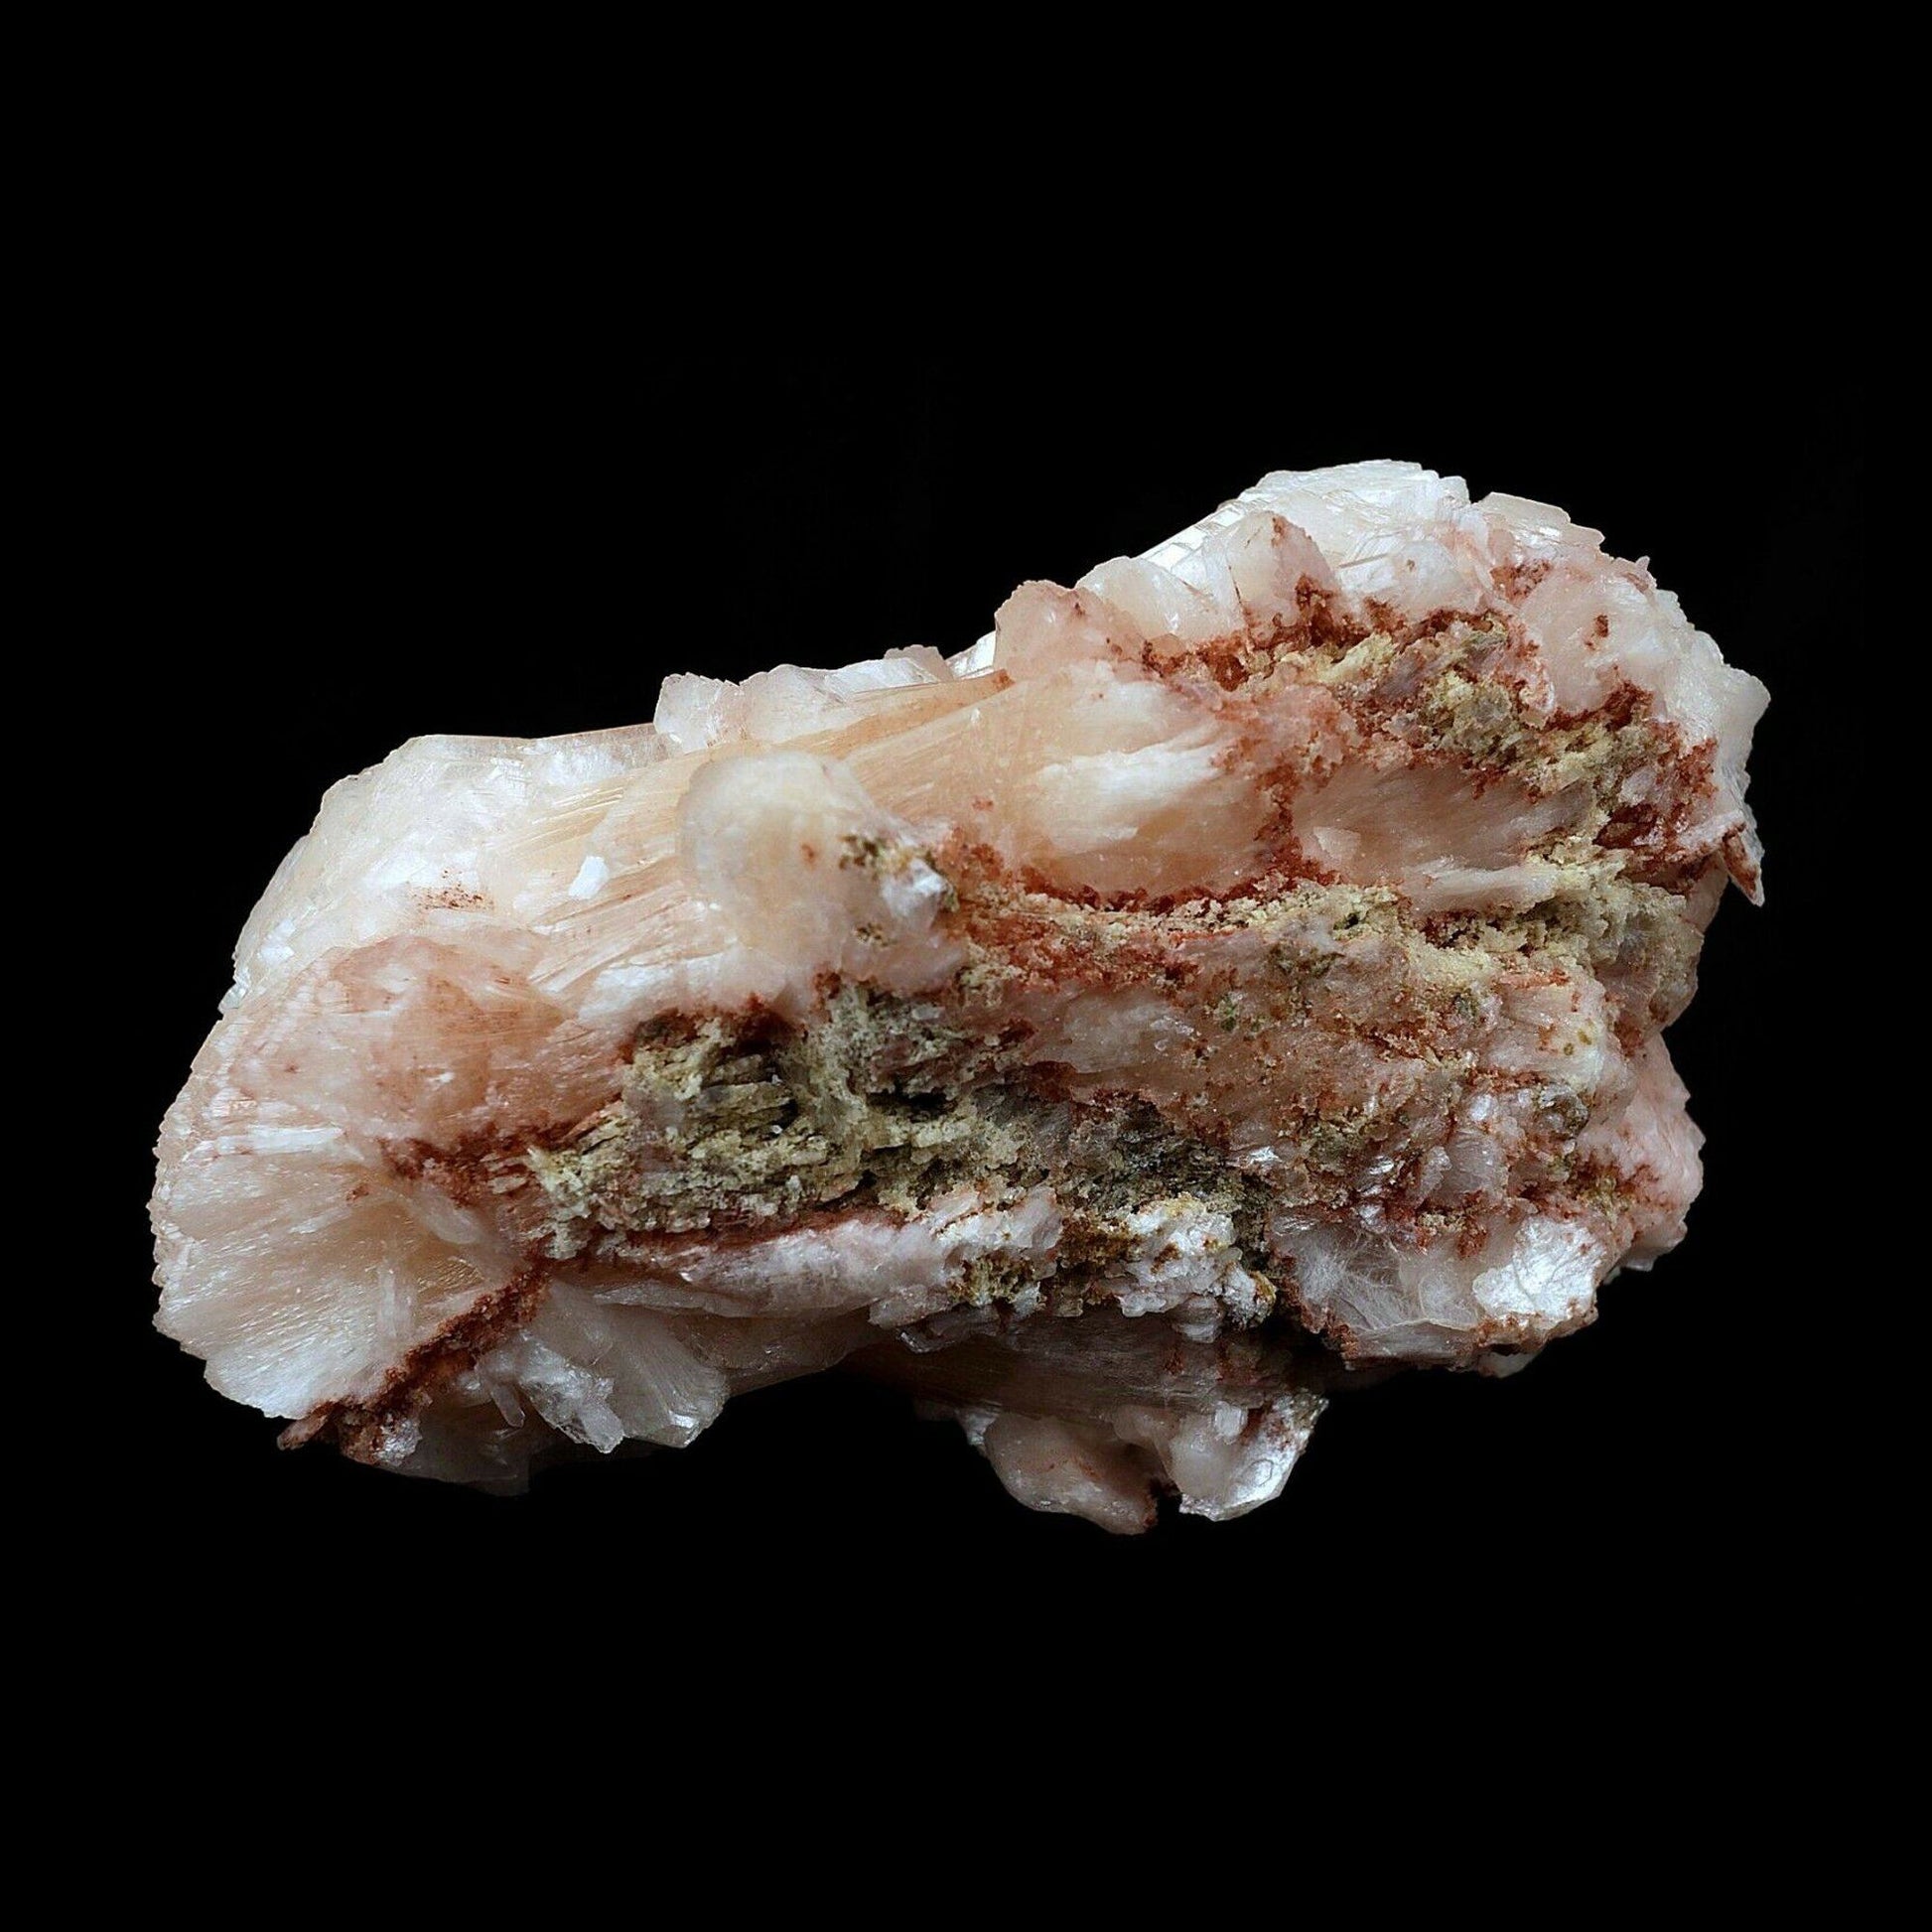 Stilbite Pink Crystal Natural Mineral Specimen # B 3642  https://www.superbminerals.us/products/stilbite-pink-crystal-natural-mineral-specimen-b-3642  Features:An exceptionally large cluster of Stilbite crystals in a classic bow tie formation along with numerous smaller Stilbite crystals on contrasting matrix. Primary Mineral(s): MM QuartzSecondary Mineral(s): StilbiteMatrix: N/A12 cm x 7 cm540 GmsLocality: Aurangabad, Maharashtra, IndiaYear of Discovery: 2020